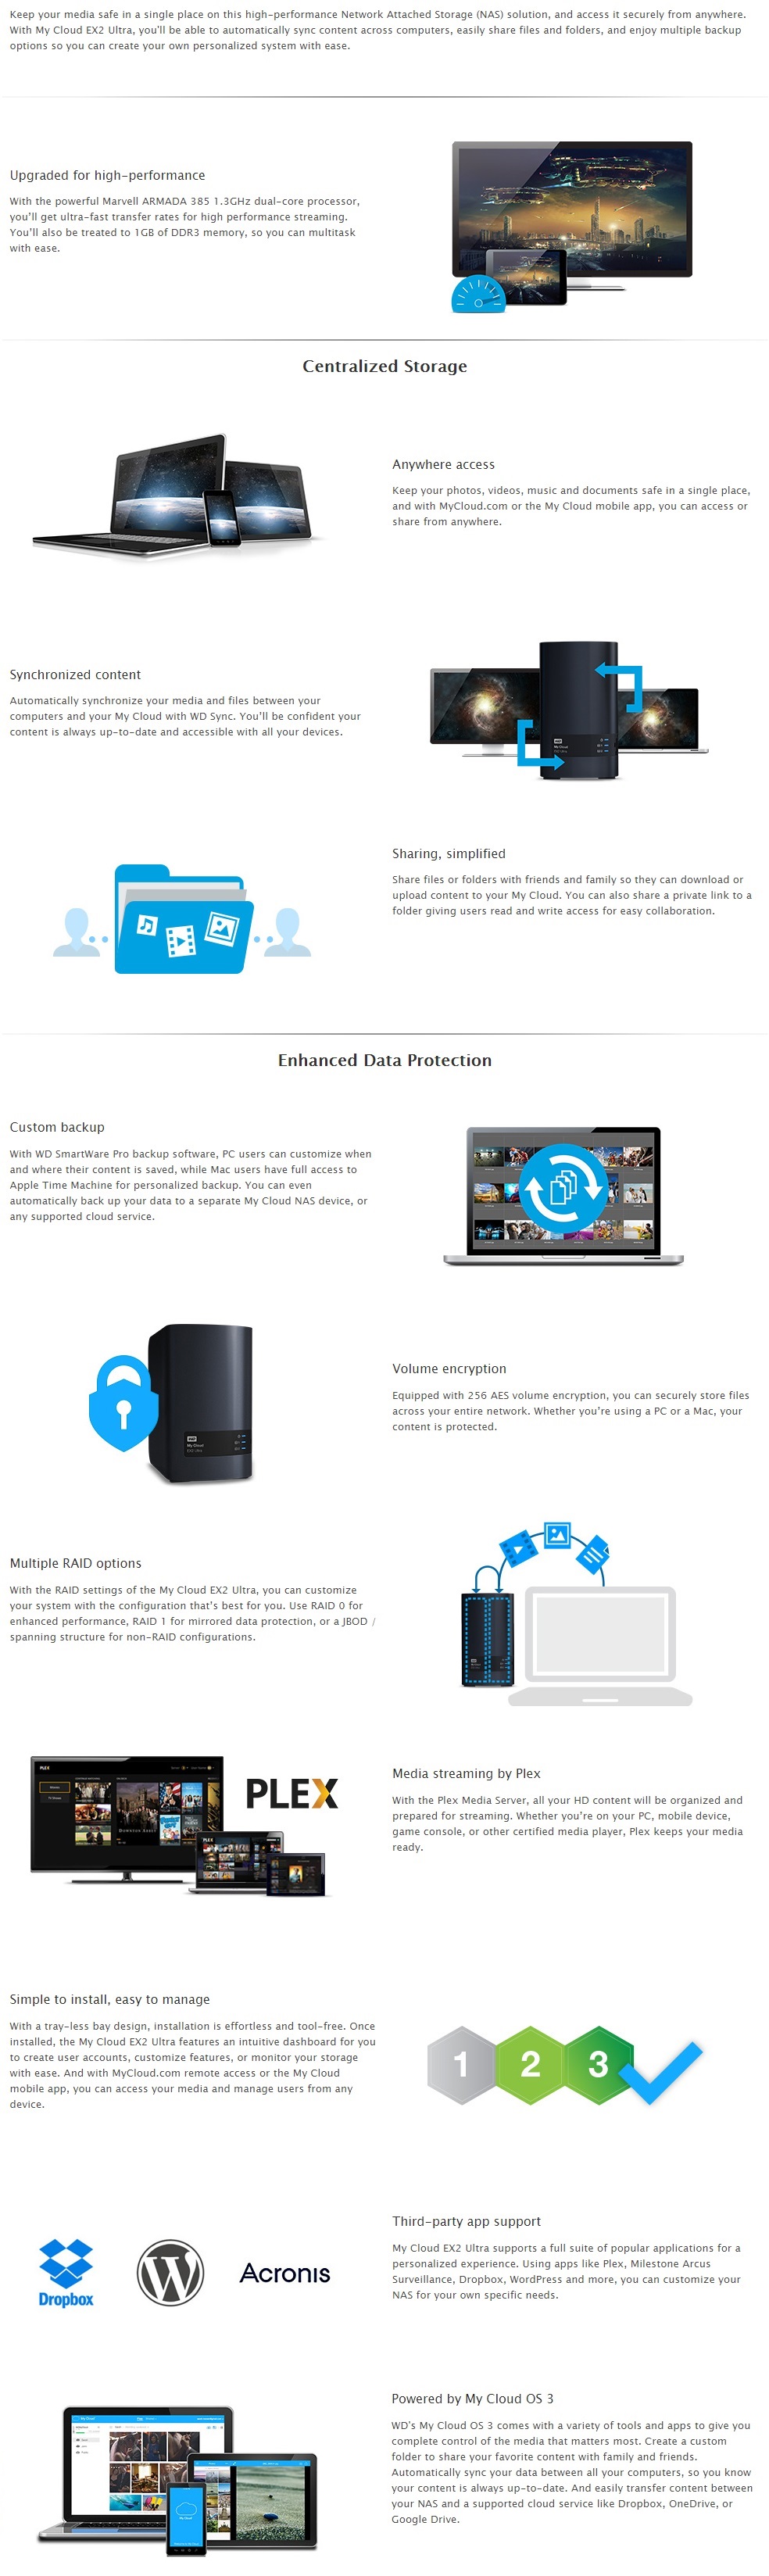 A large marketing image providing additional information about the product WD My Cloud Expert EX2 Ultra 2 Bay NAS Enclosure - Additional alt info not provided